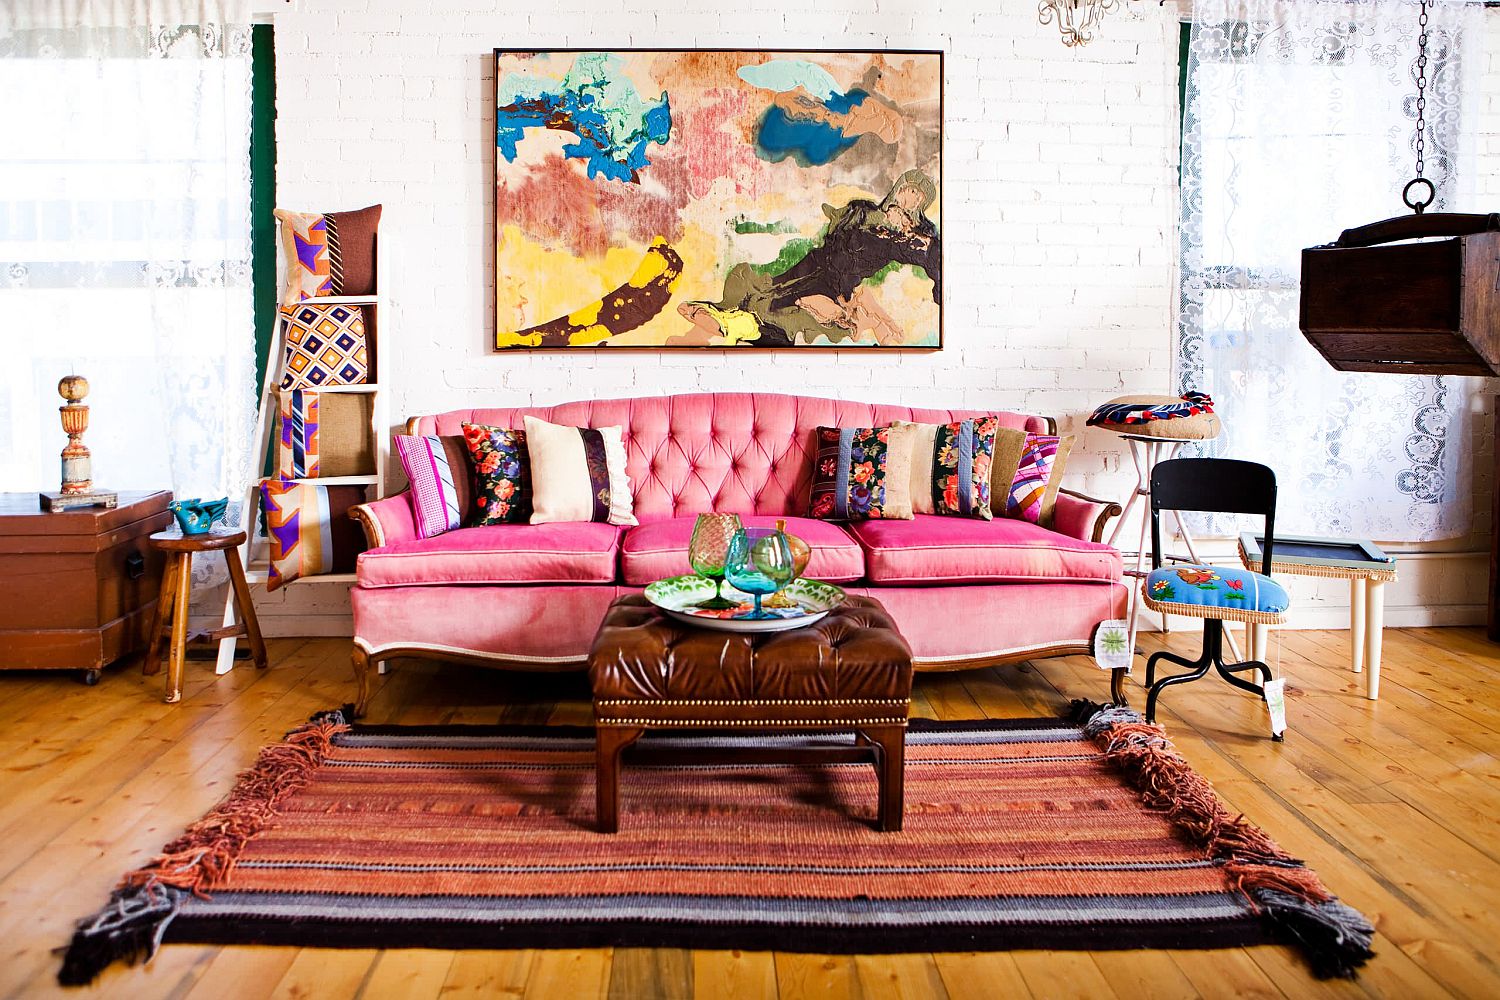 Fabulous-pink-sofa-anchors-this-exquisite-brick-wall-living-room-with-eclectic-style